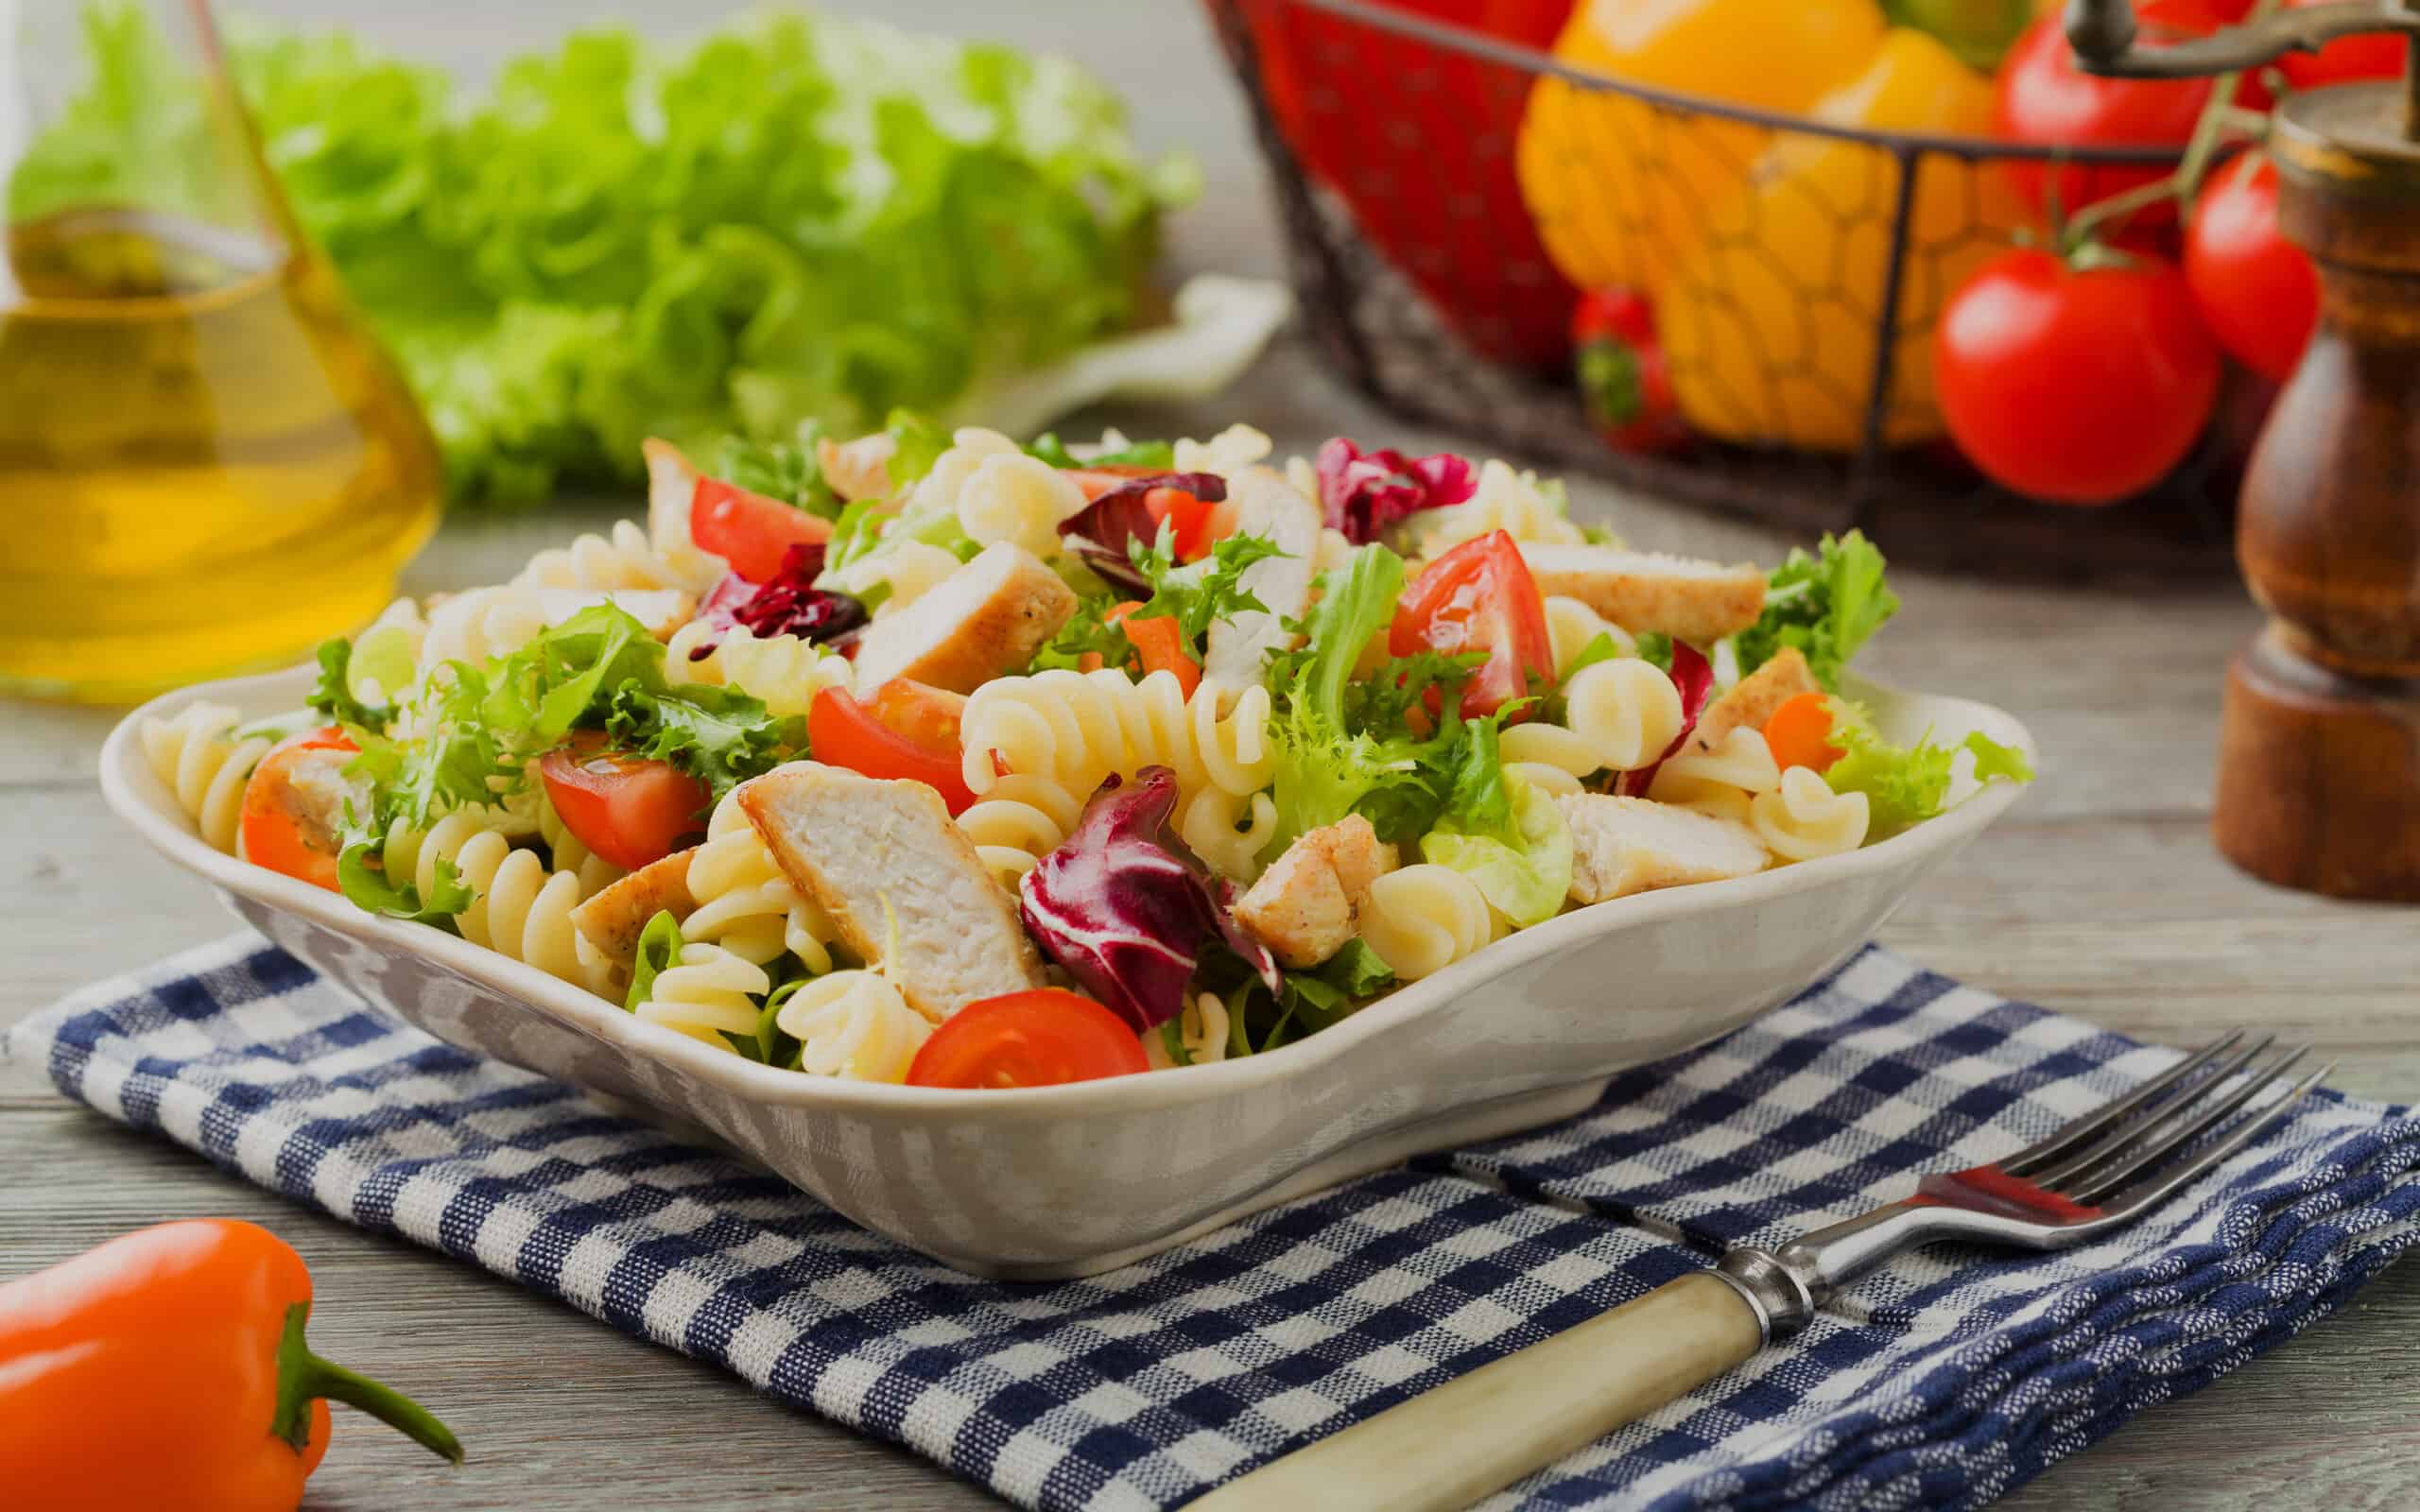 Delicious pasta salad with green lettuce, tomatoes and roasted chicken.